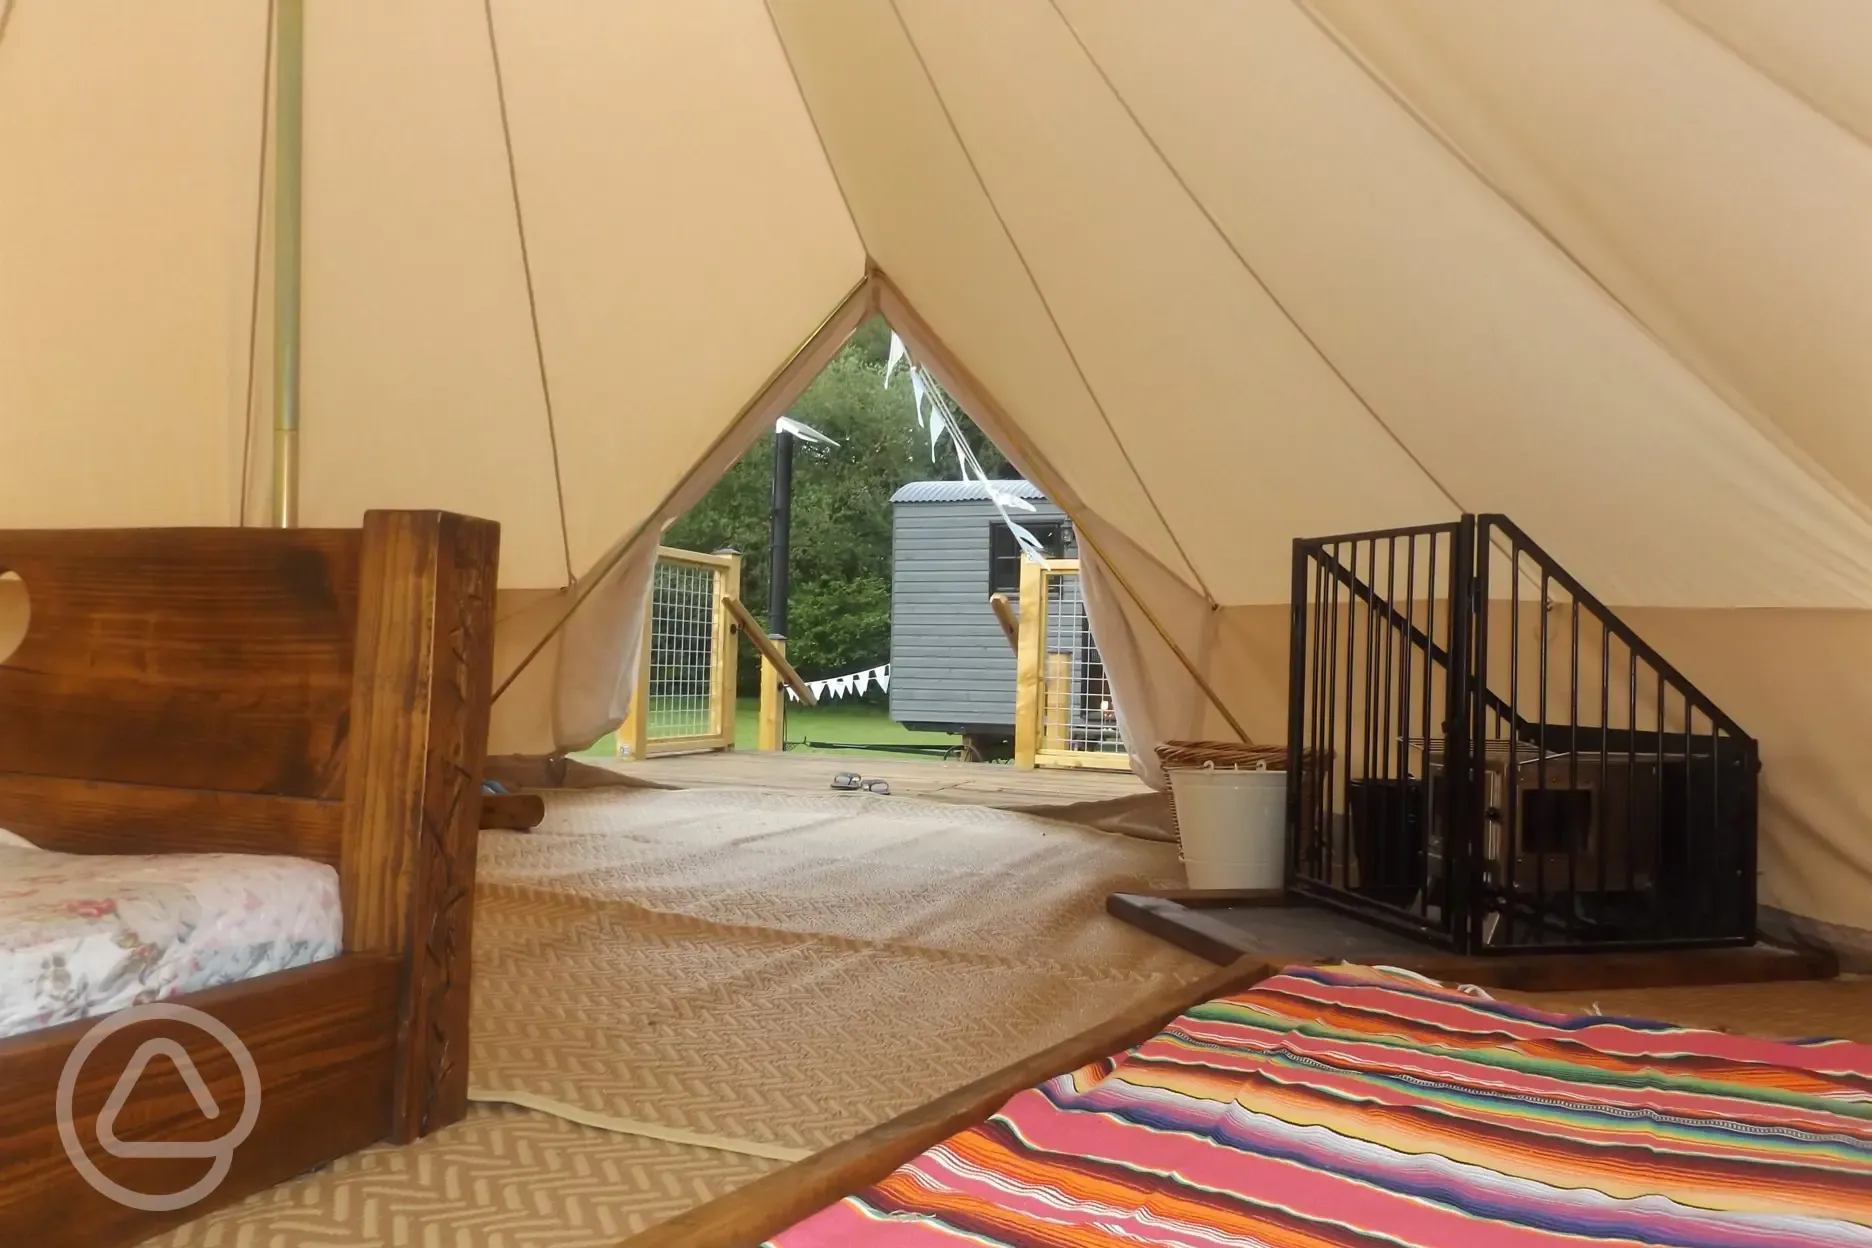 Large bell tent interior